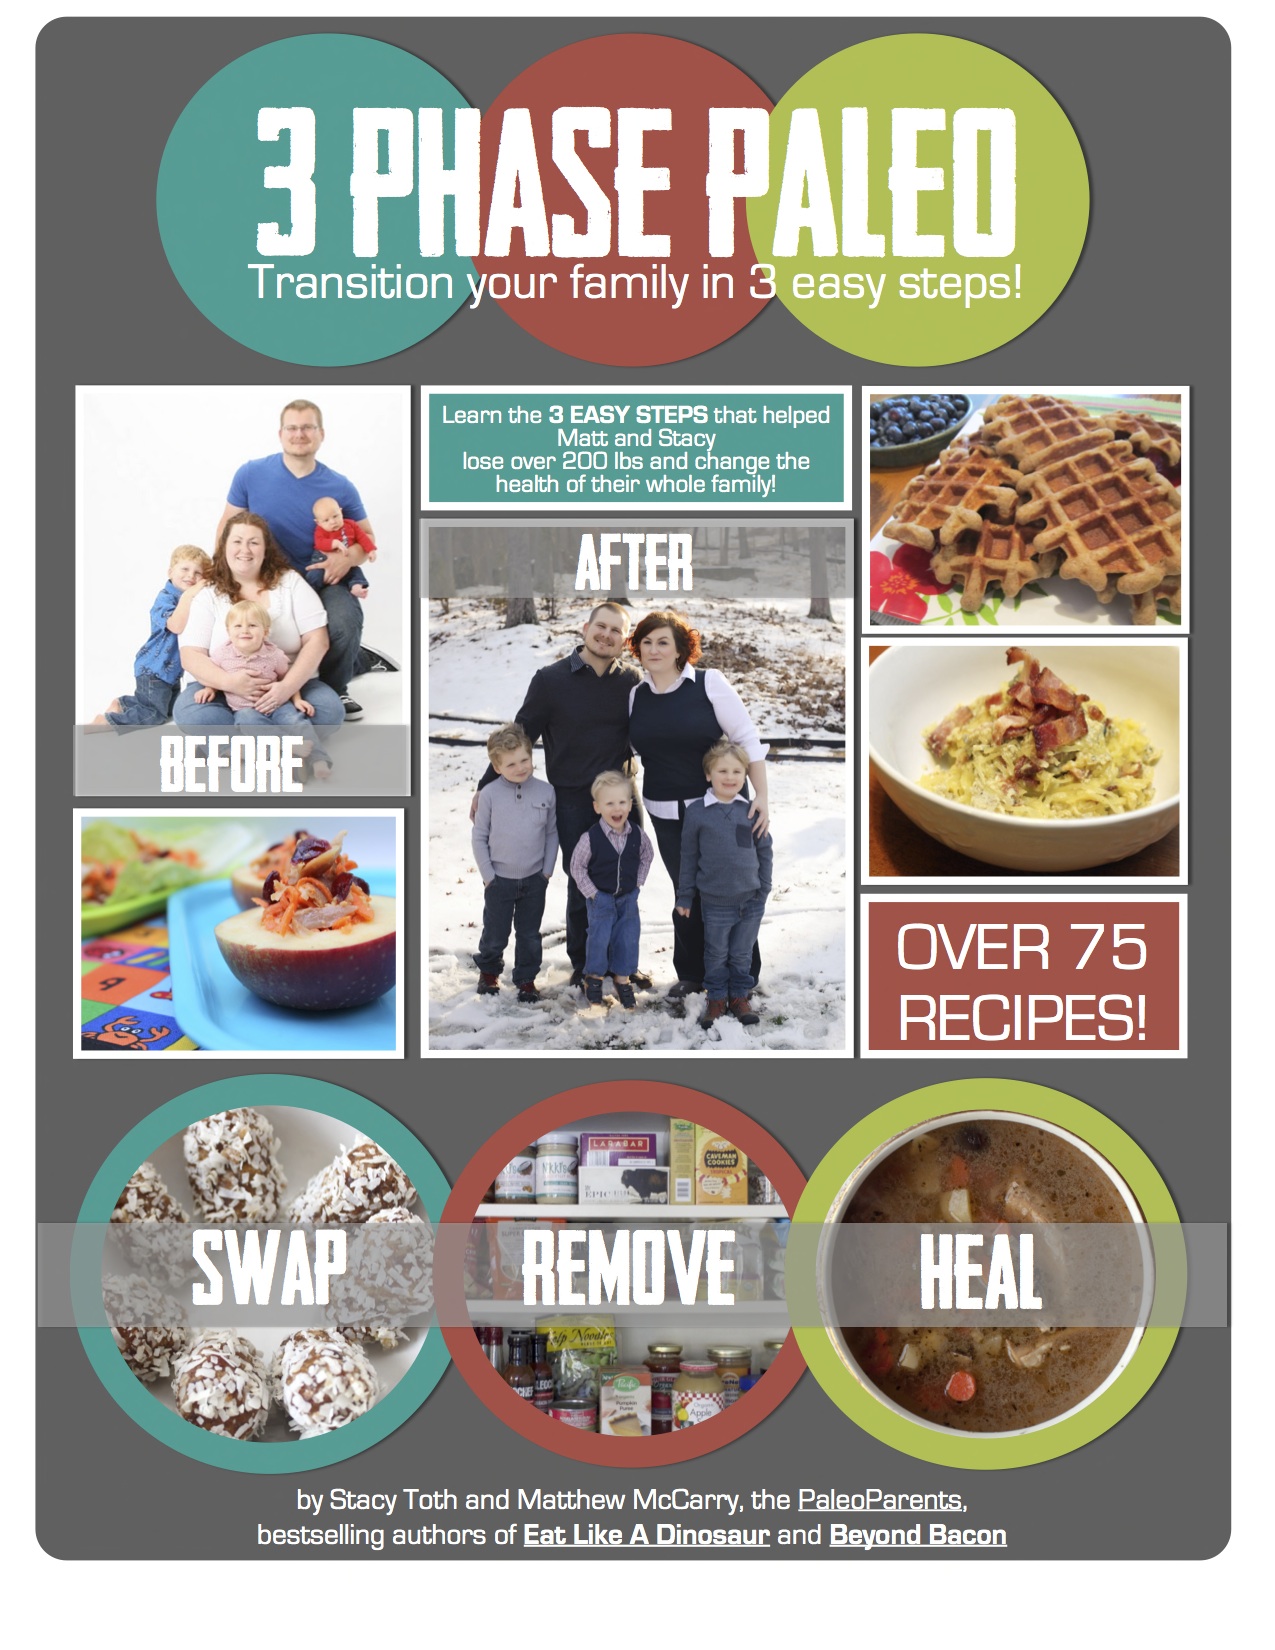 http://realeverything.com/wp-content/uploads/Cover-3-Phase-Paleo-by-Paleo-Parents1.jpg